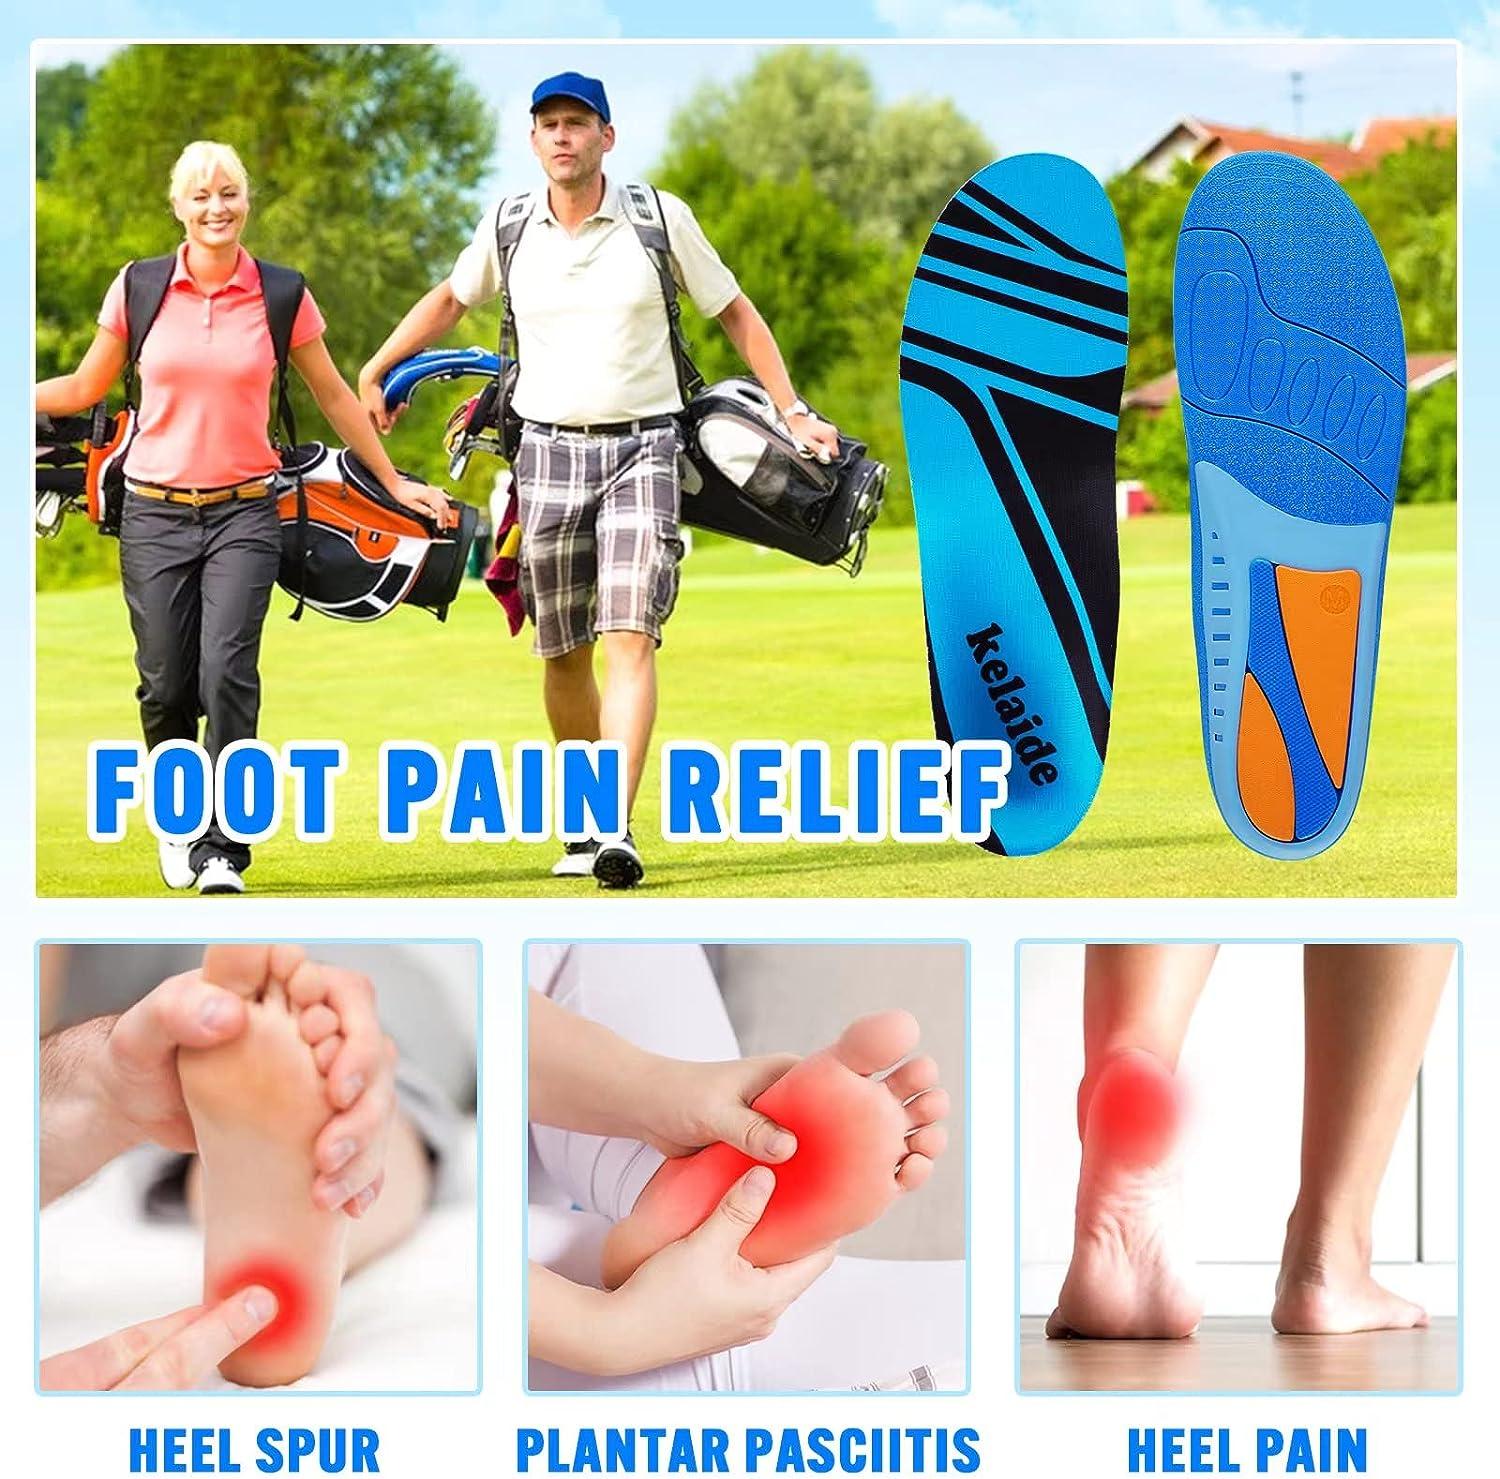 5 shoes that cause pain & tips to choose the right one